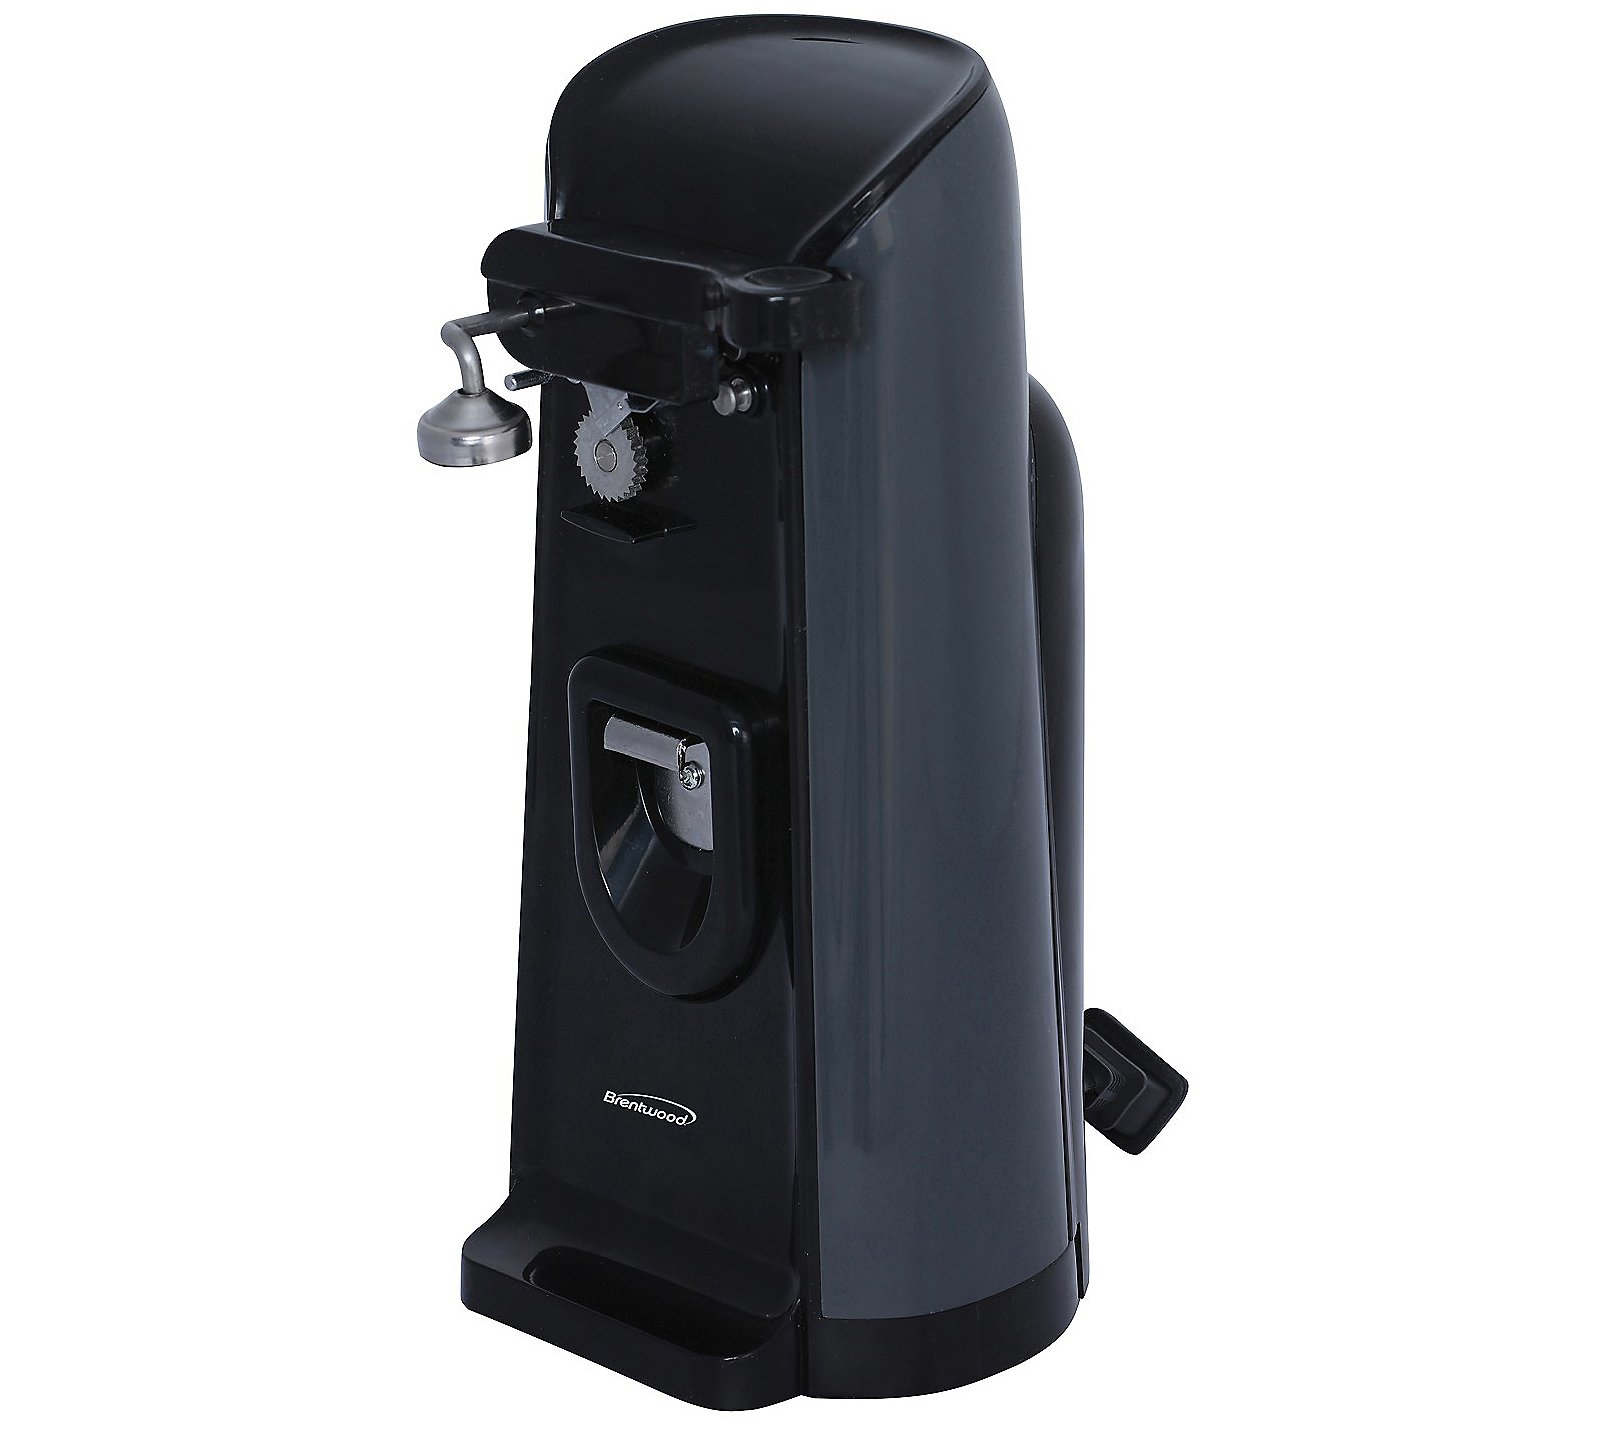 Brentwood 3-in-1 Electric Can Opener